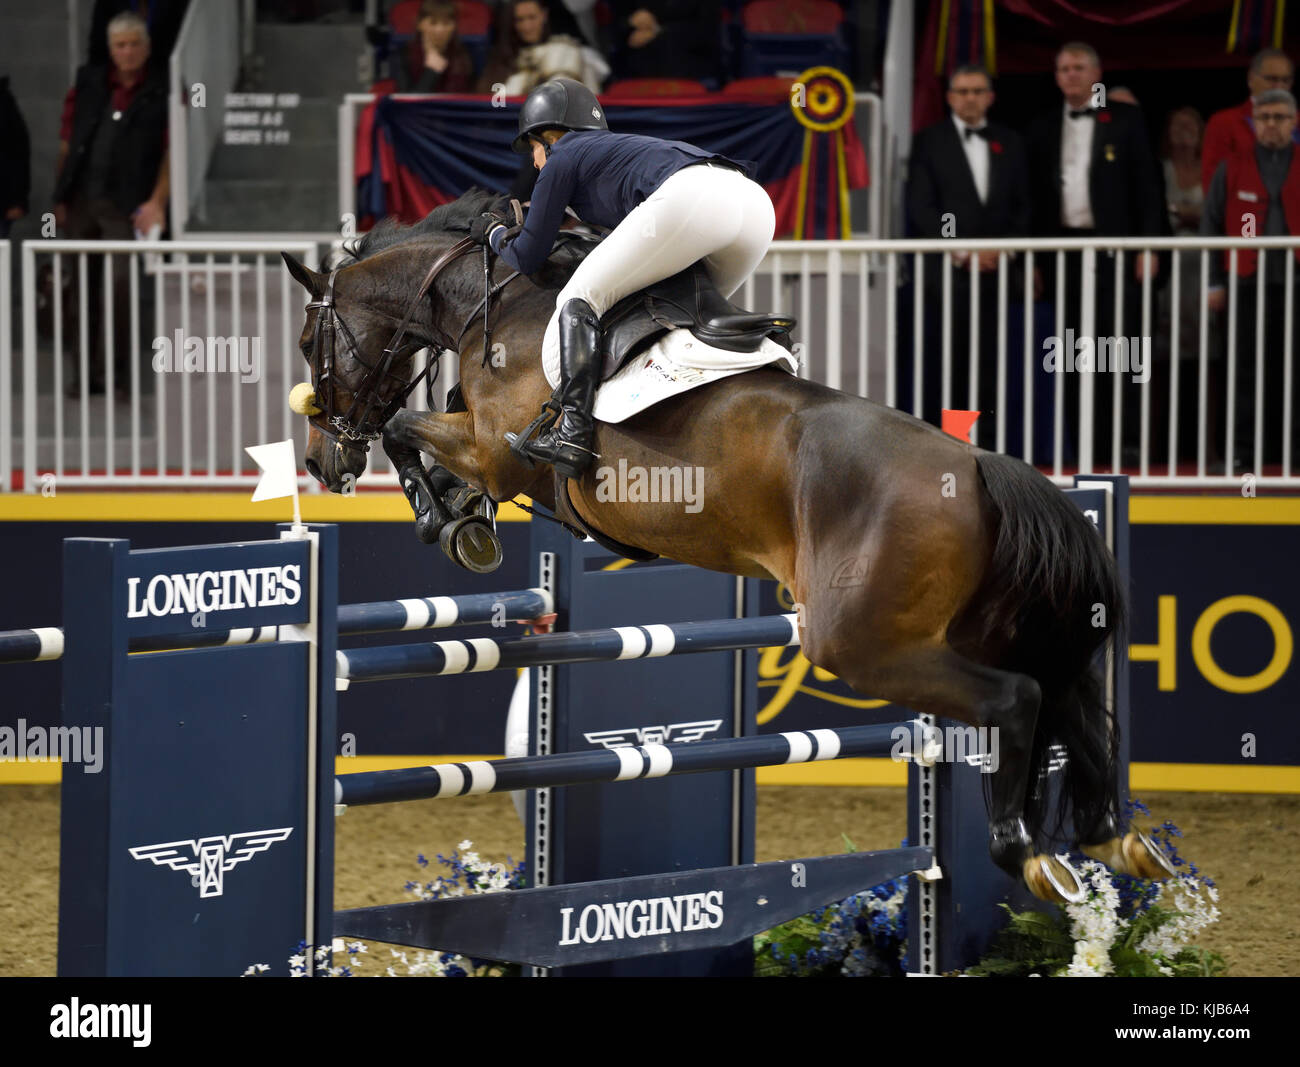 Elizabeth Madden USA riding Breitling LS in the Longines FEI World Cup Show Jumping competition jump off at the Royal Horse Show Toronto Stock Photo